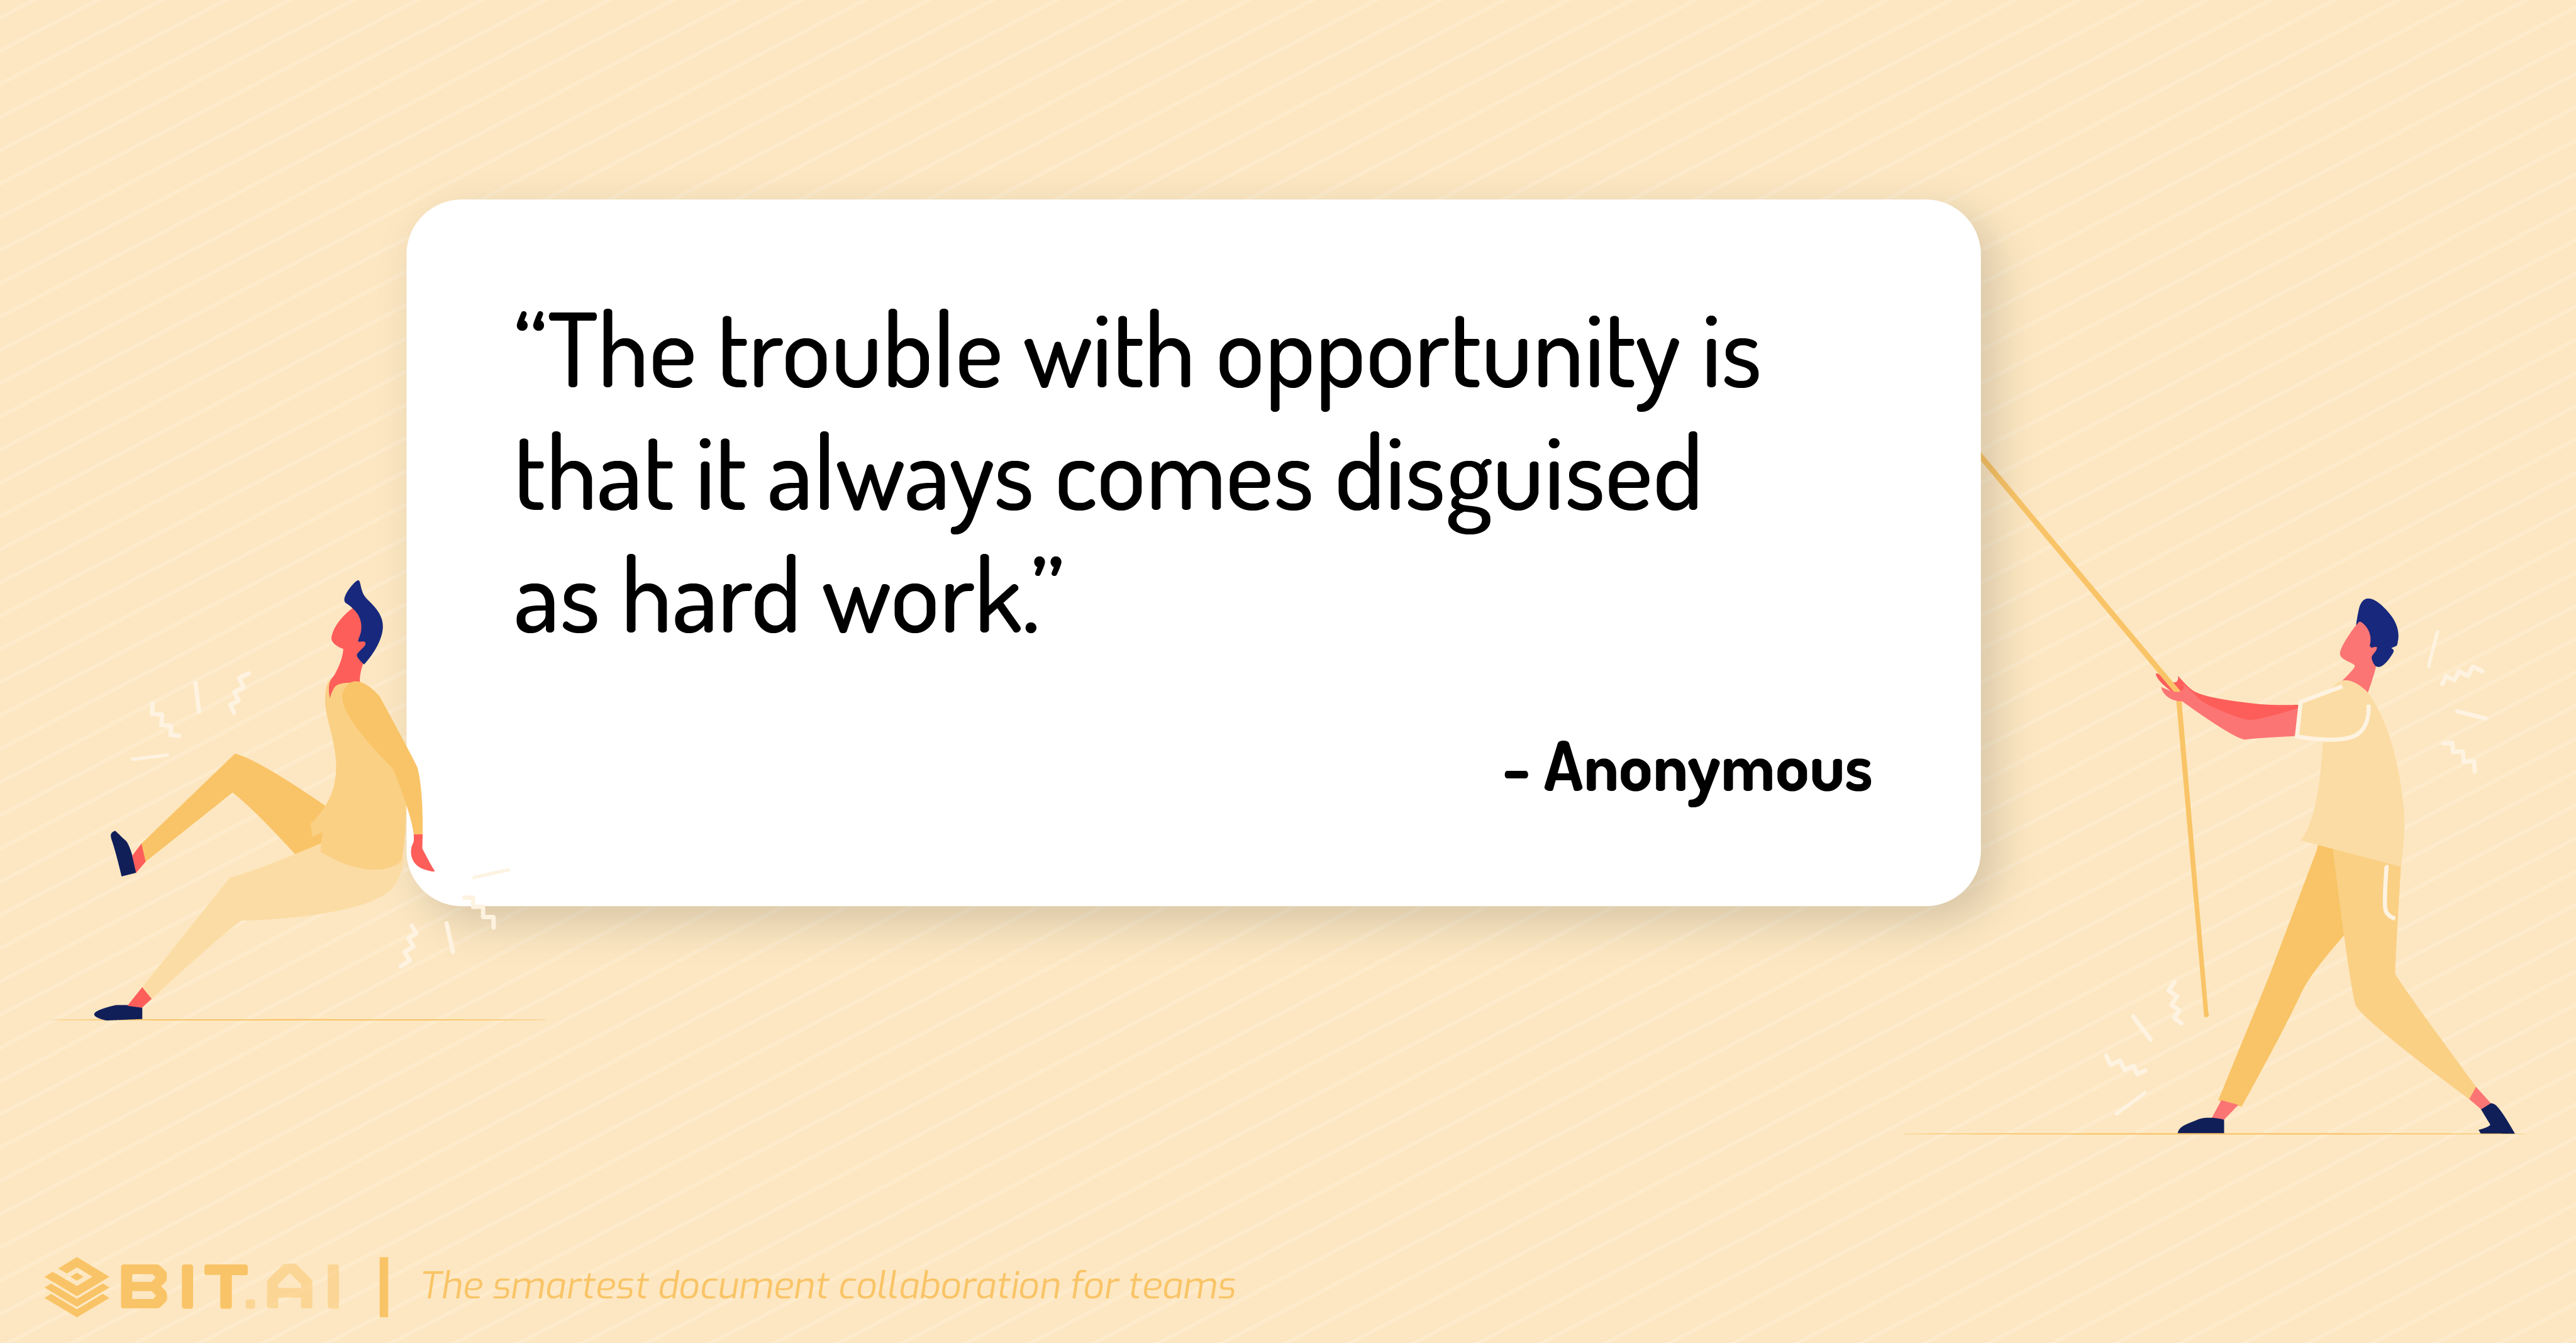 “The trouble with opportunity is that it always comes disguised as hard work.” - Hard work quote 